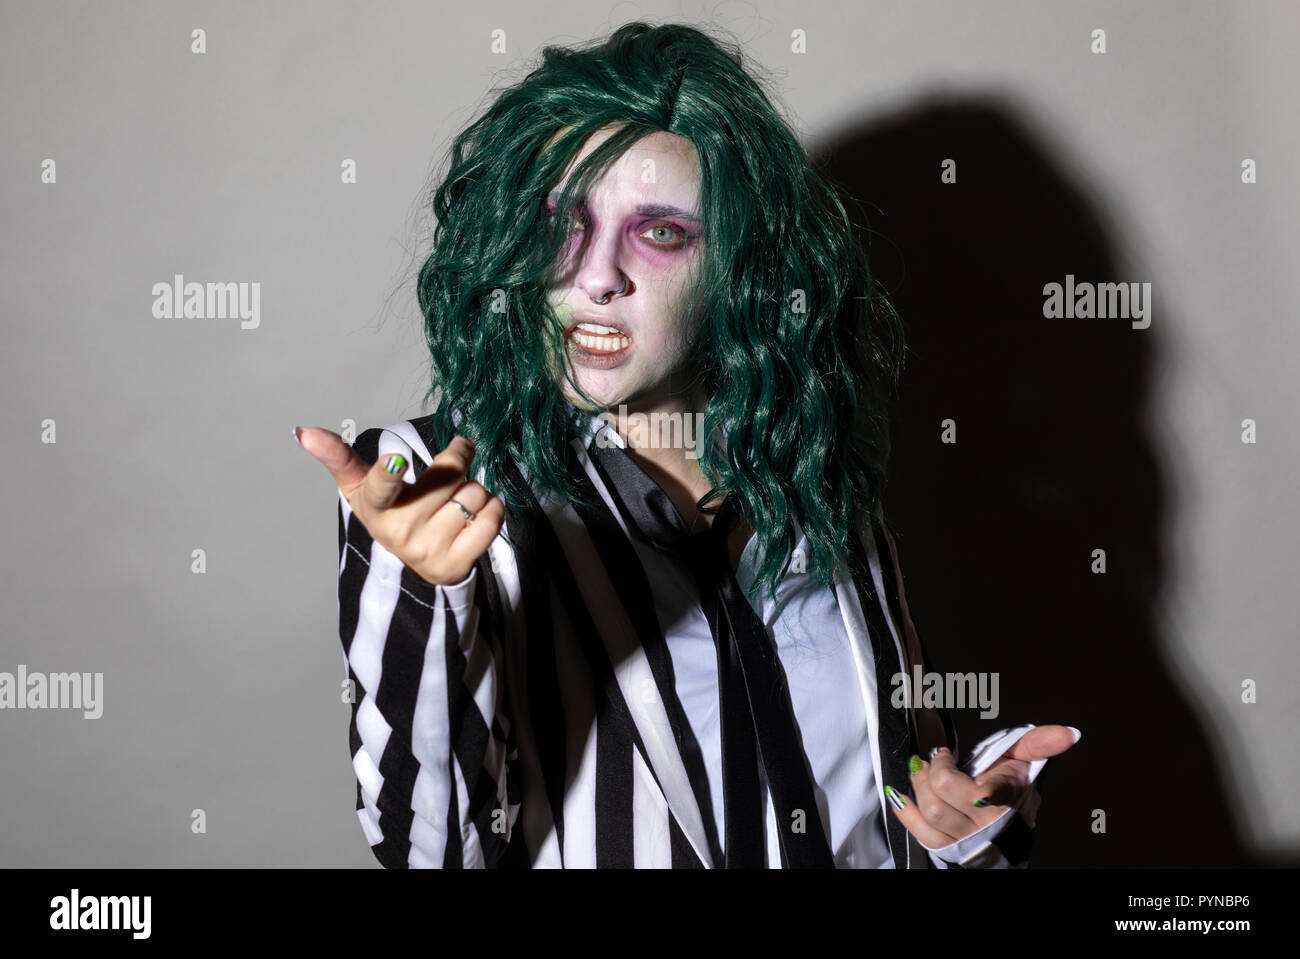 A young woman dresses up for Halloween in a pinstripe suit and green hair. Stock Photo